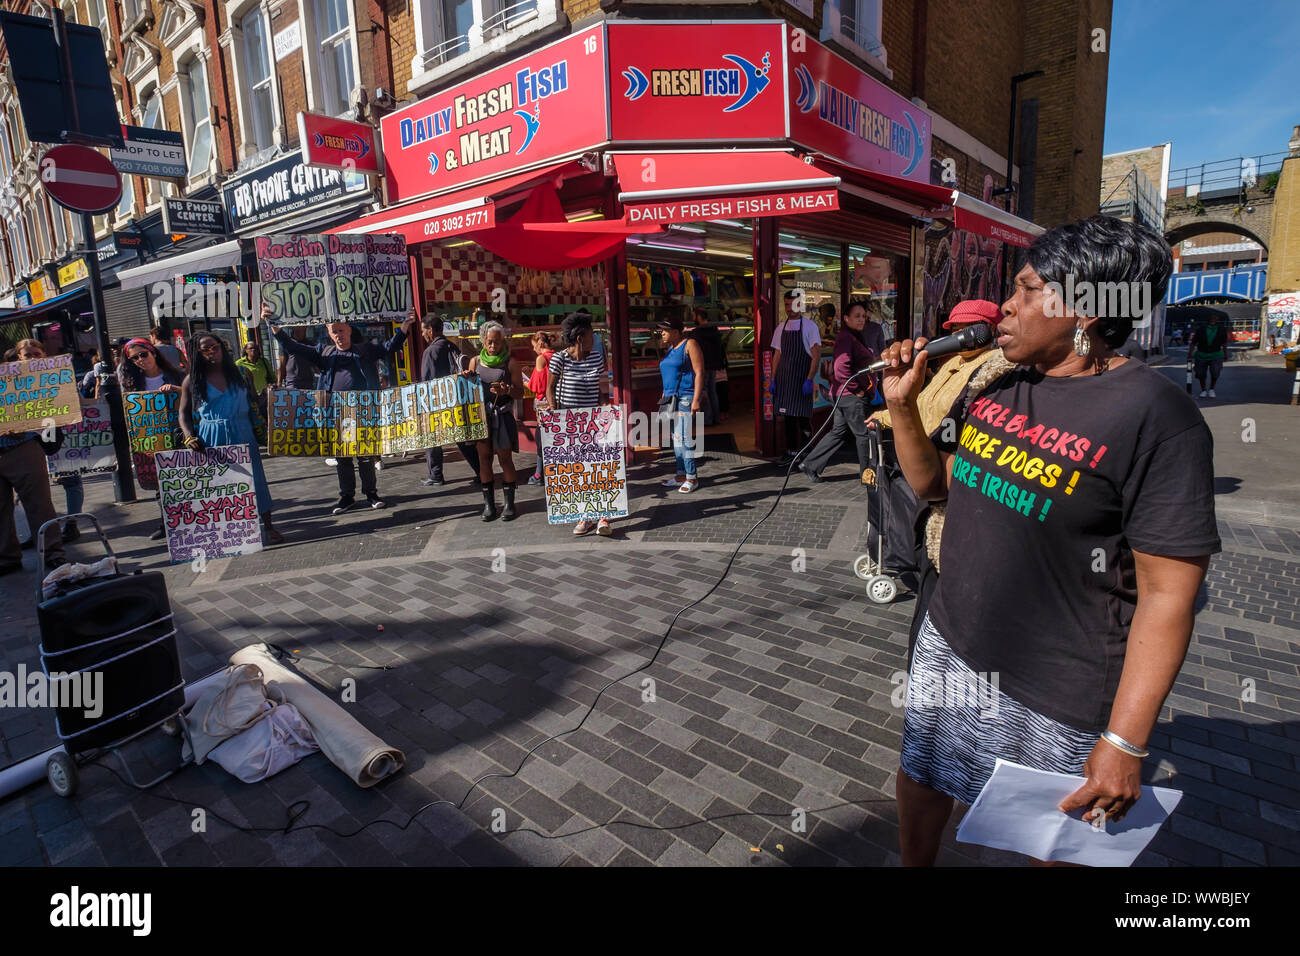 London, UK. 14th September 2019. Eulalee who has been fighting the Home Office for 16 years speaks at the Movement for Justice and Lambeth Unison Black Workers' Group protest in Brixton Market against the continuing persecution of Windrush family members and other migrants, calling for freedom of movement, the closure of immigration detention prisons, and an end to Brexit which is being used to whip up immigrant-bashing and nationalism to establish a Trump-style regime in Britain under Boris Johnson. Peter Marshall/Alamy Live News Stock Photo